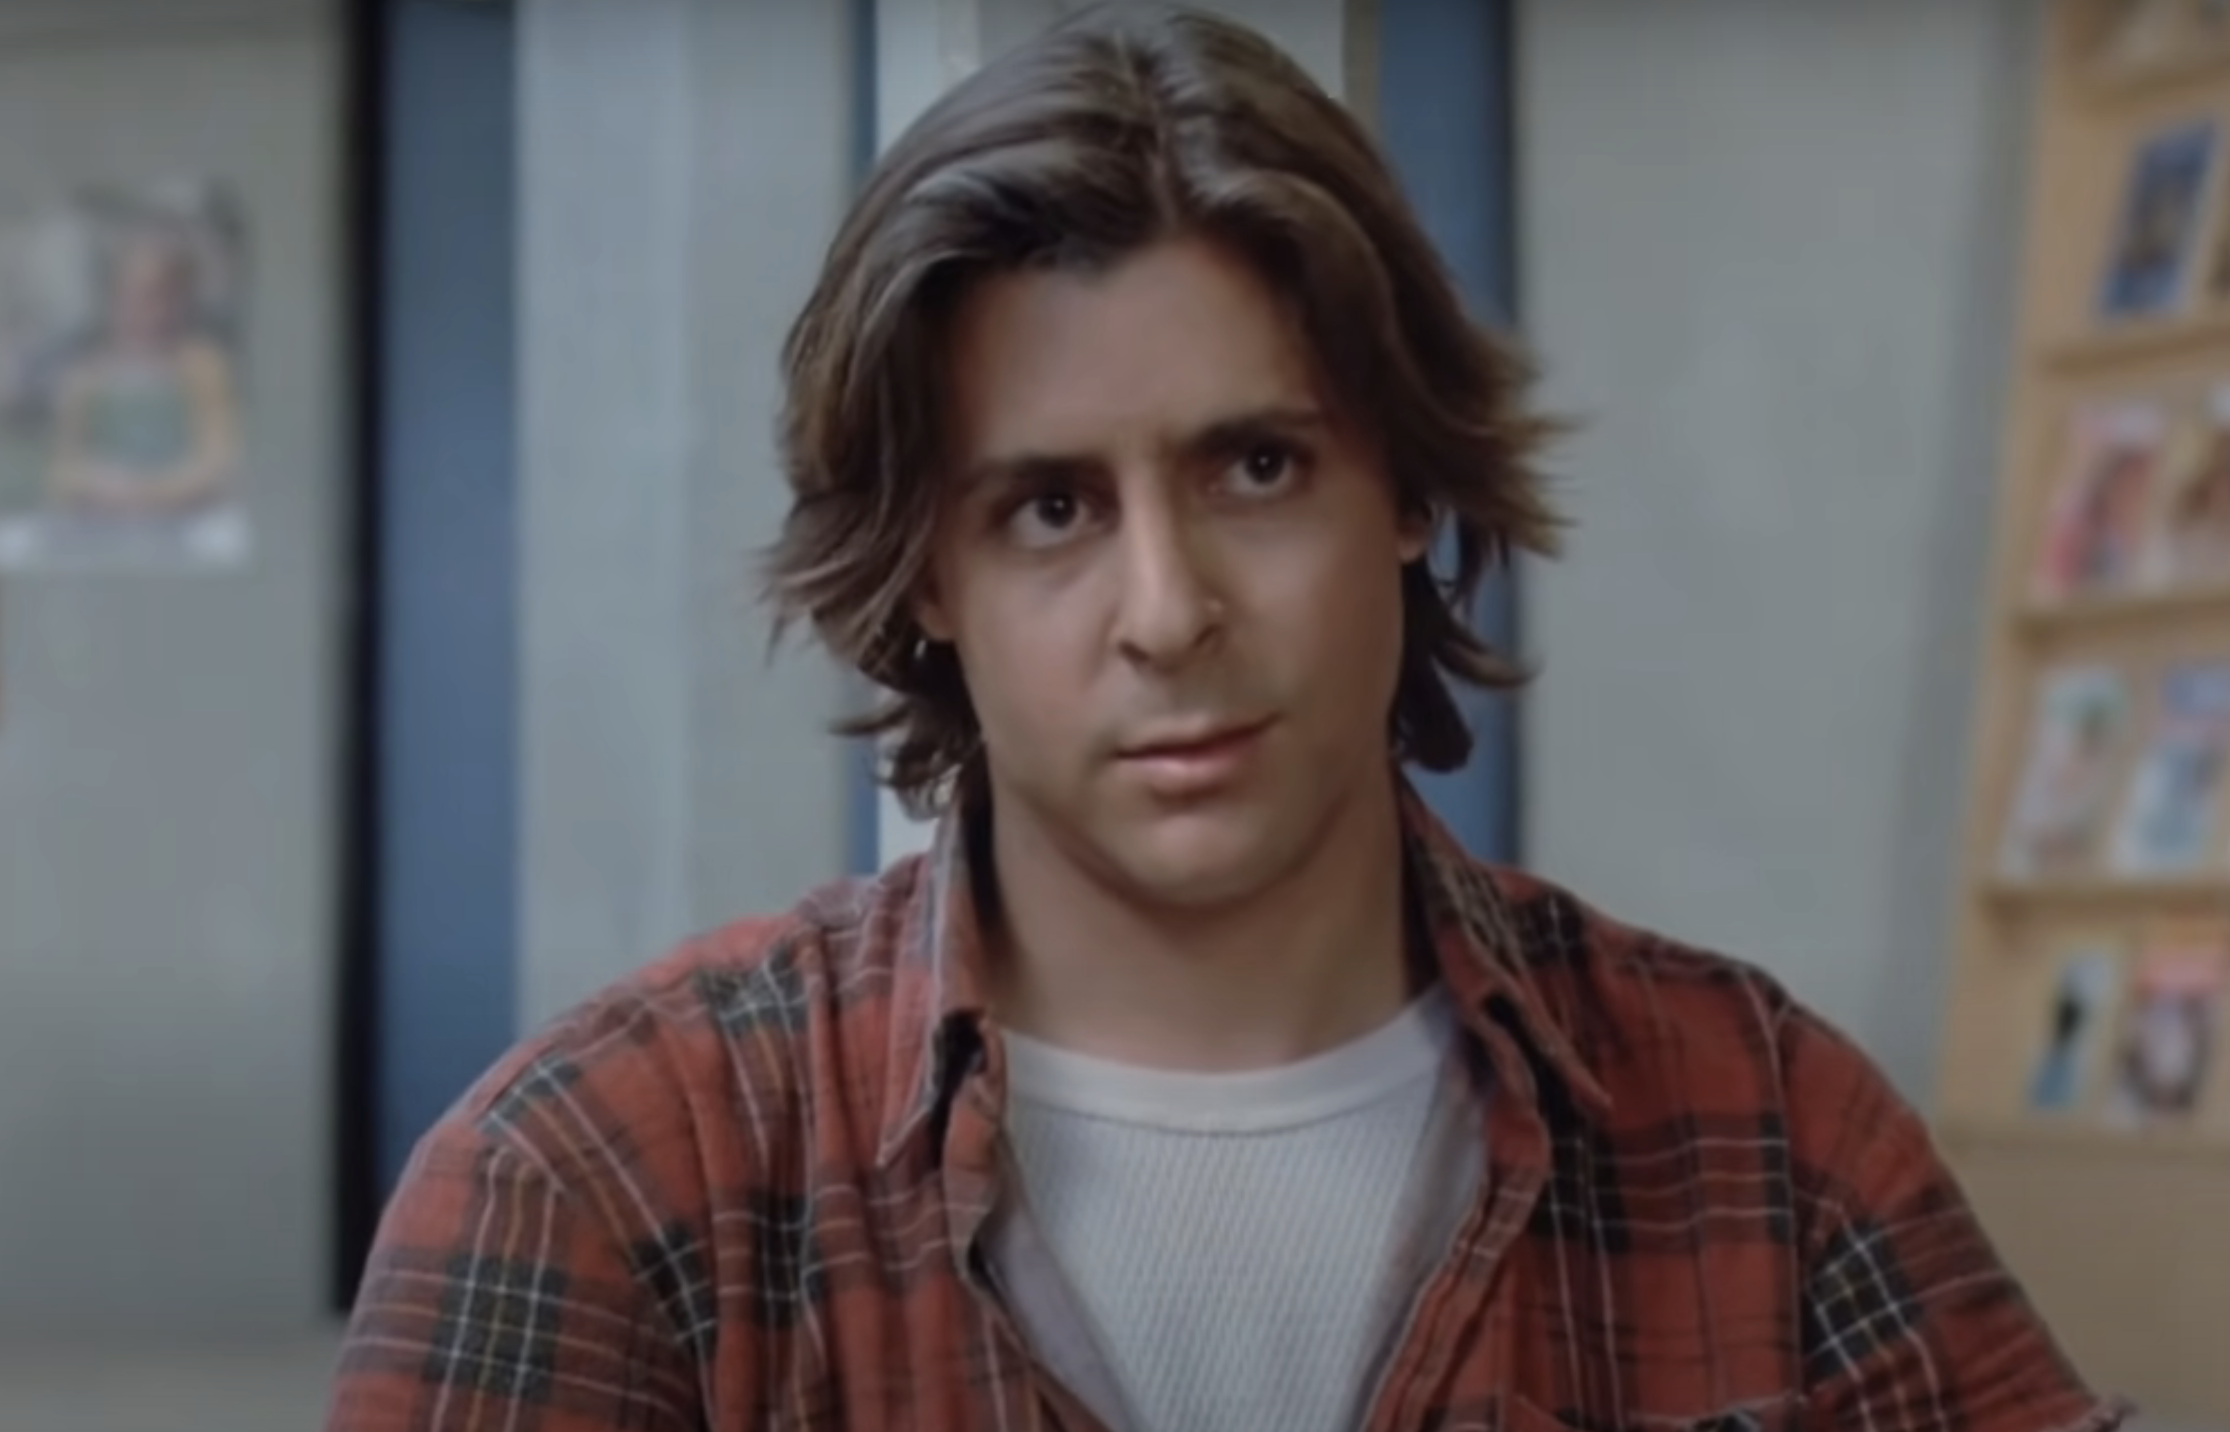 John Bender from The Breakfast Club wearing a plaid shirt, looking forward with a slight frown